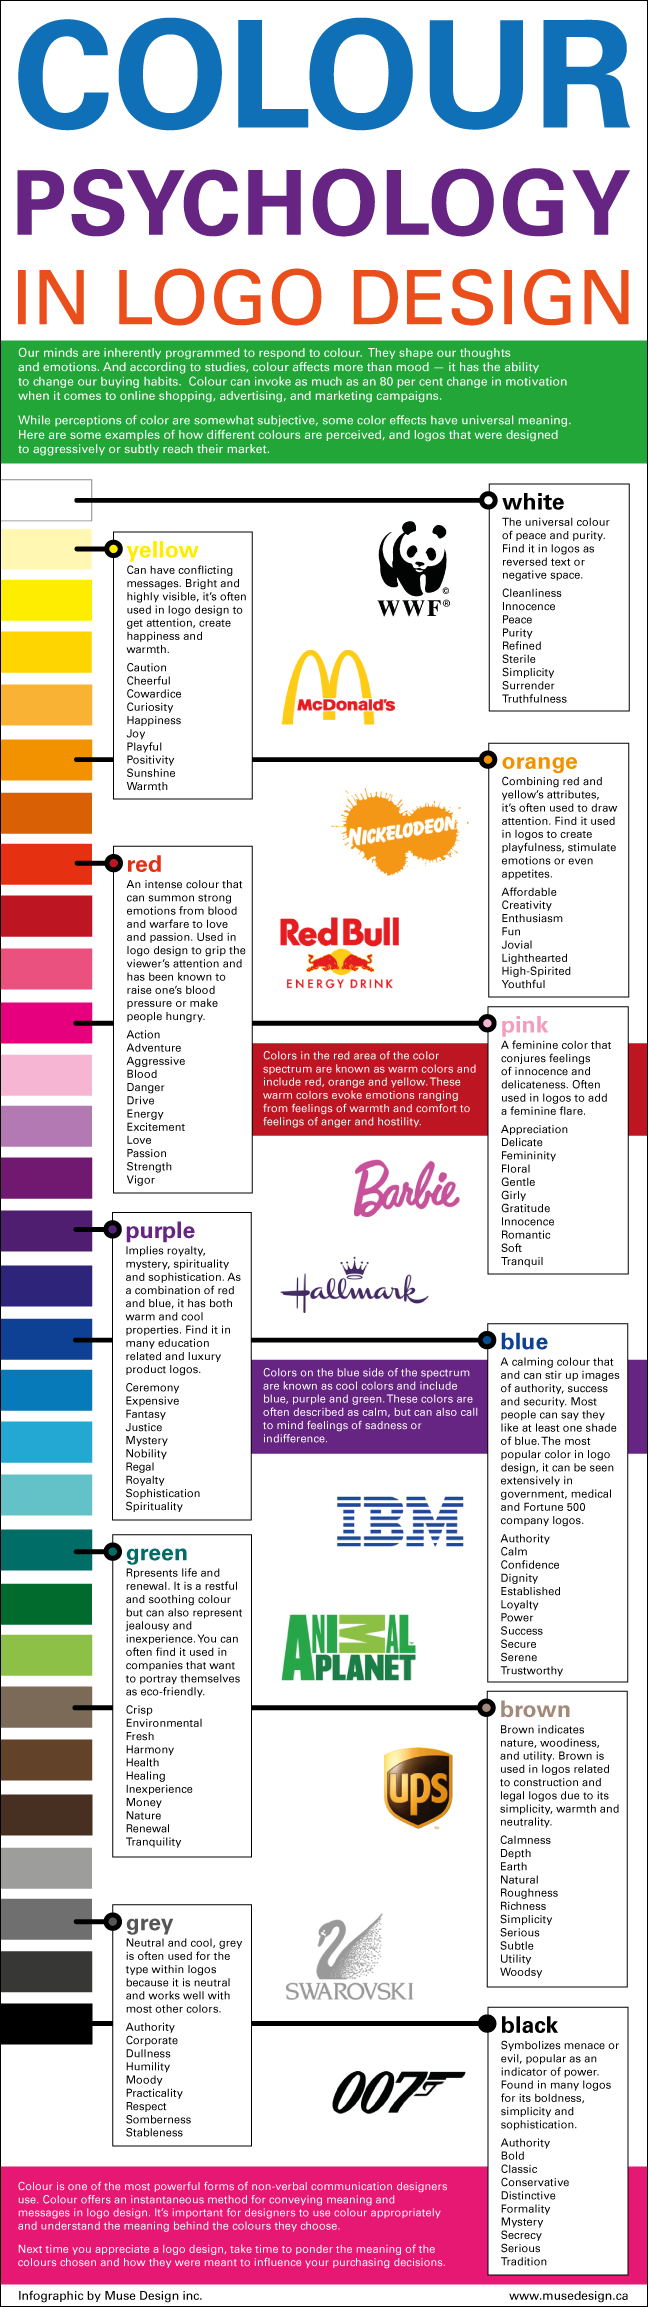 Pink as a Branding Color  Color theory, Branding, Logo design infographic